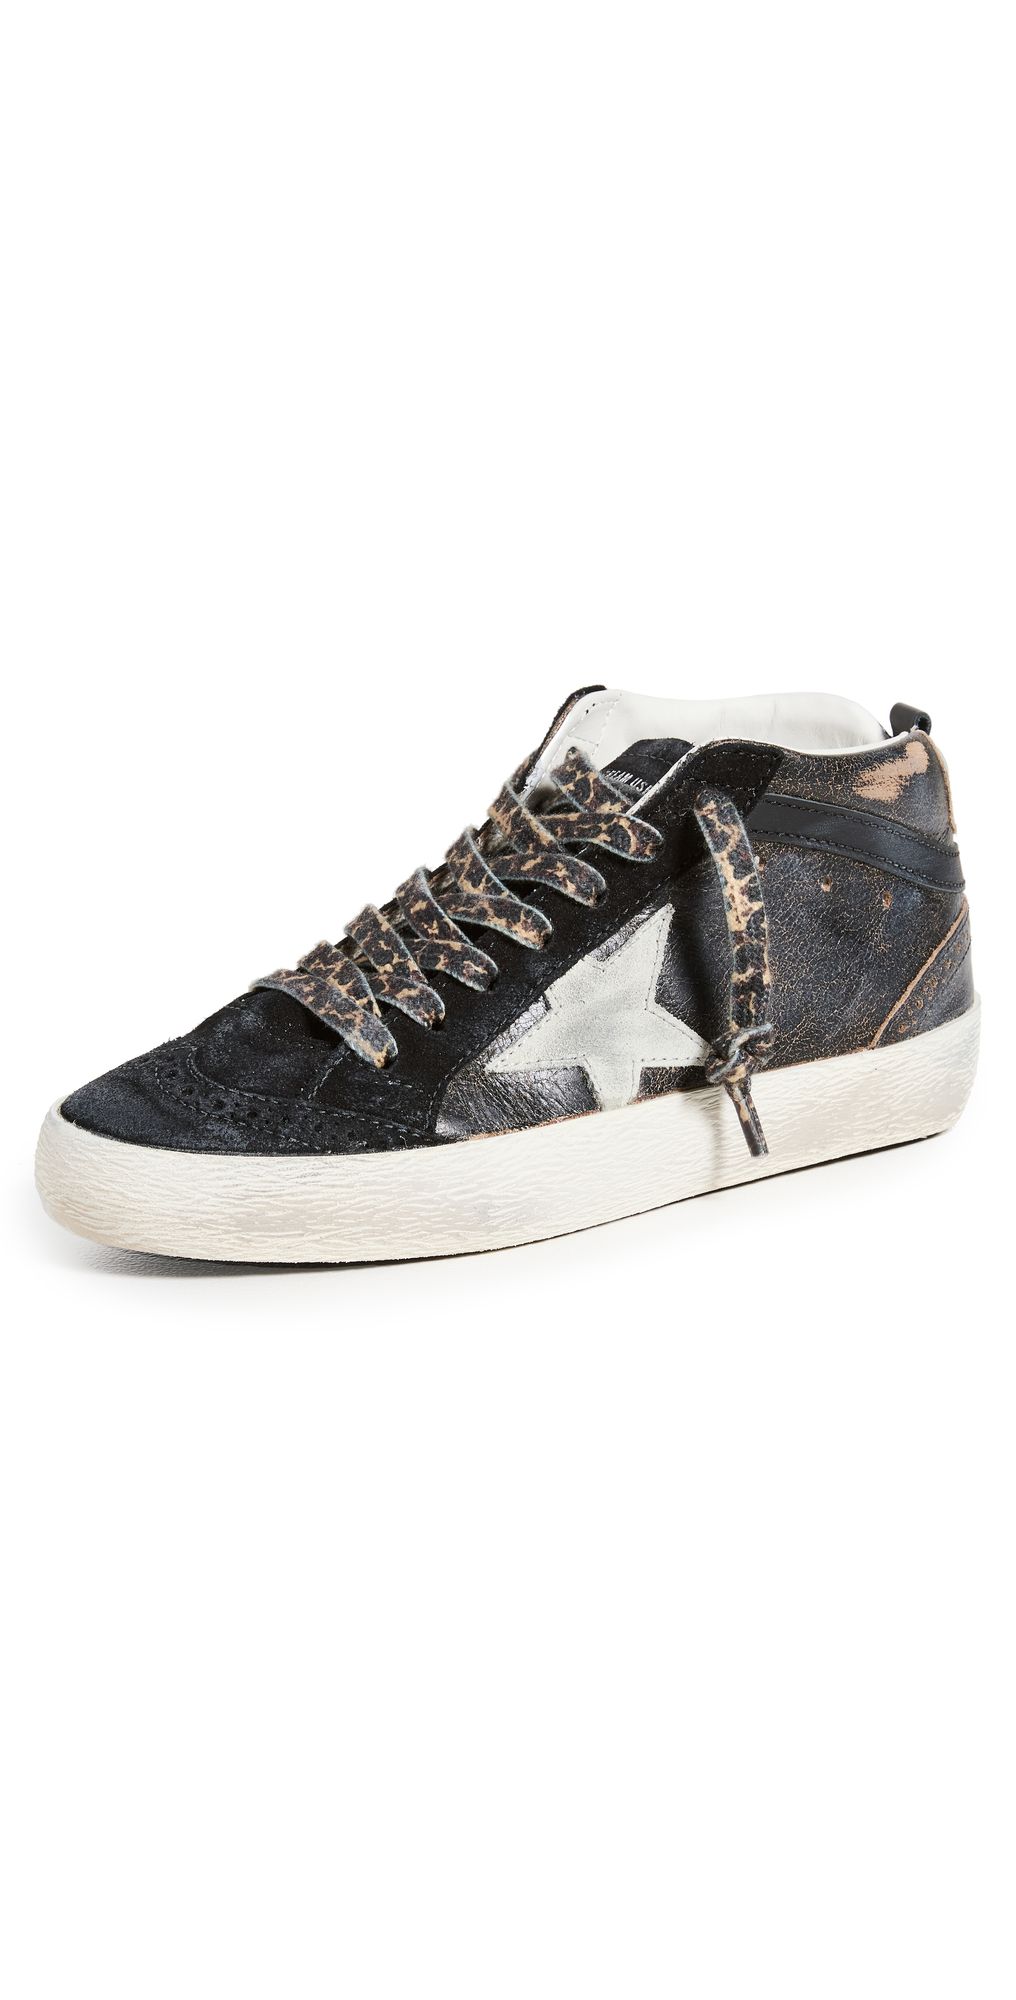 Golden Goose Mid Star Shiny Leather Upper and Spur Suede Sneakers | Shopbop